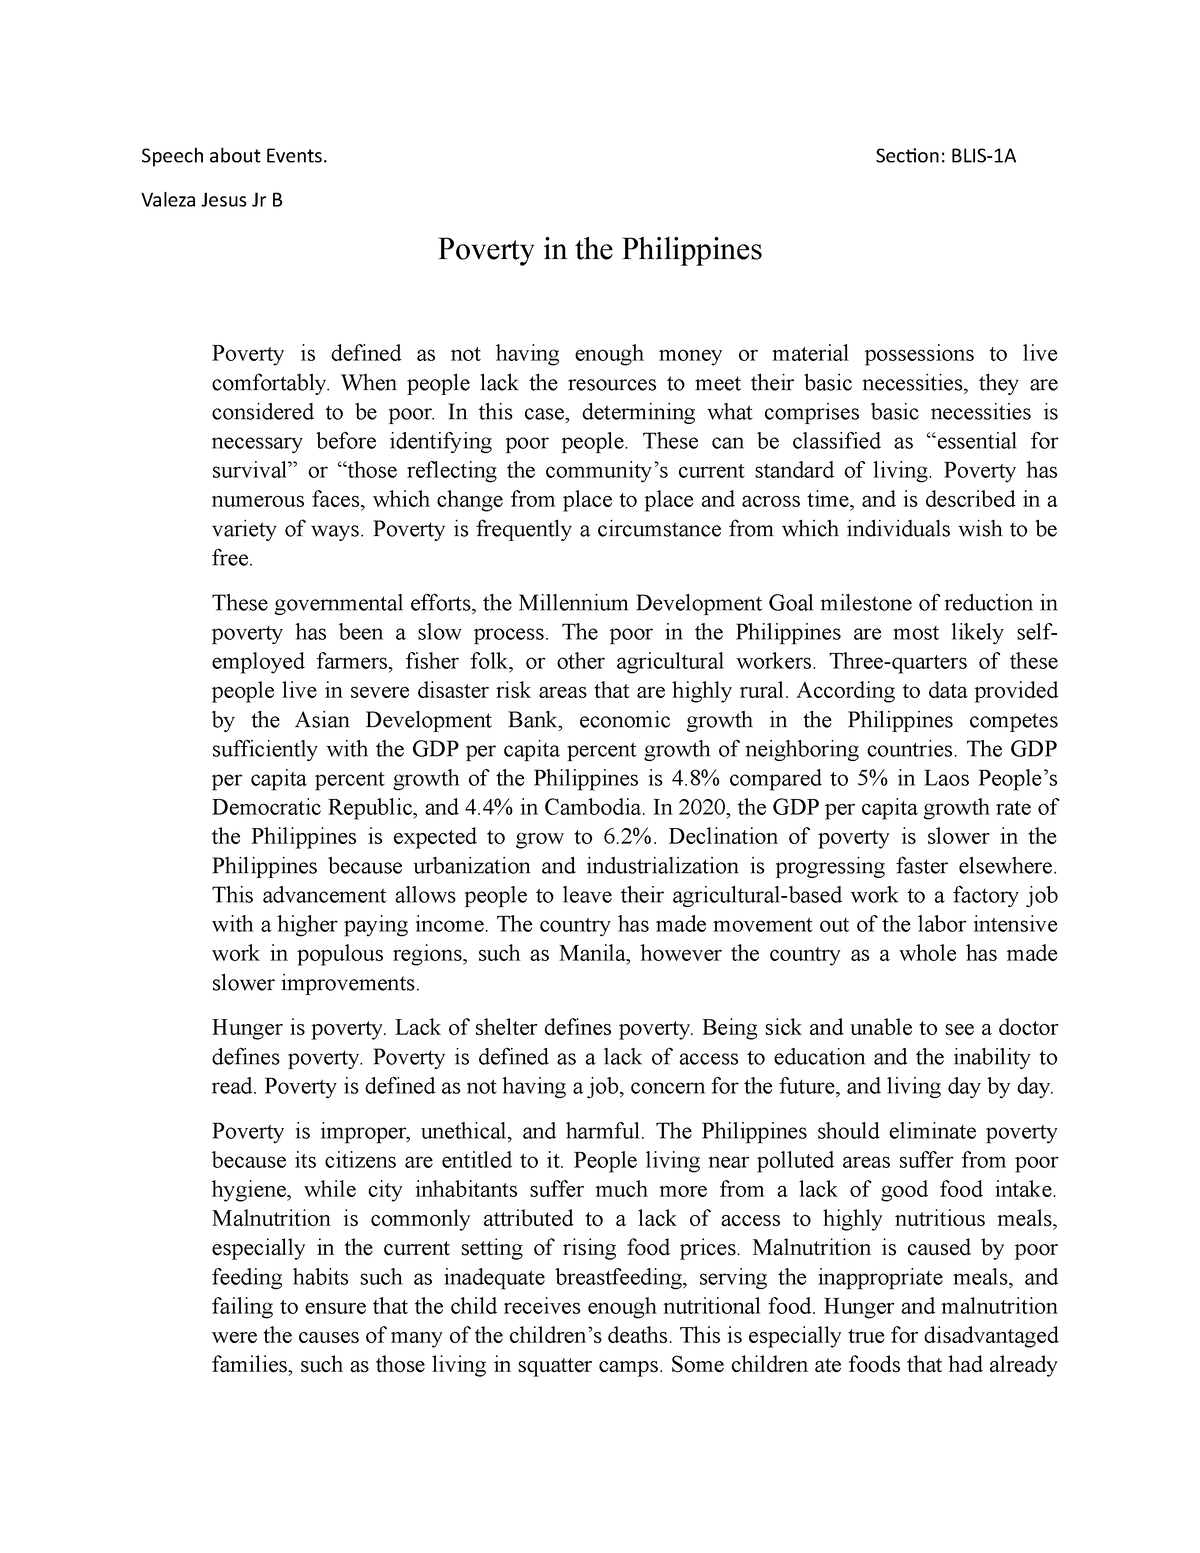 essay for poverty in the philippines